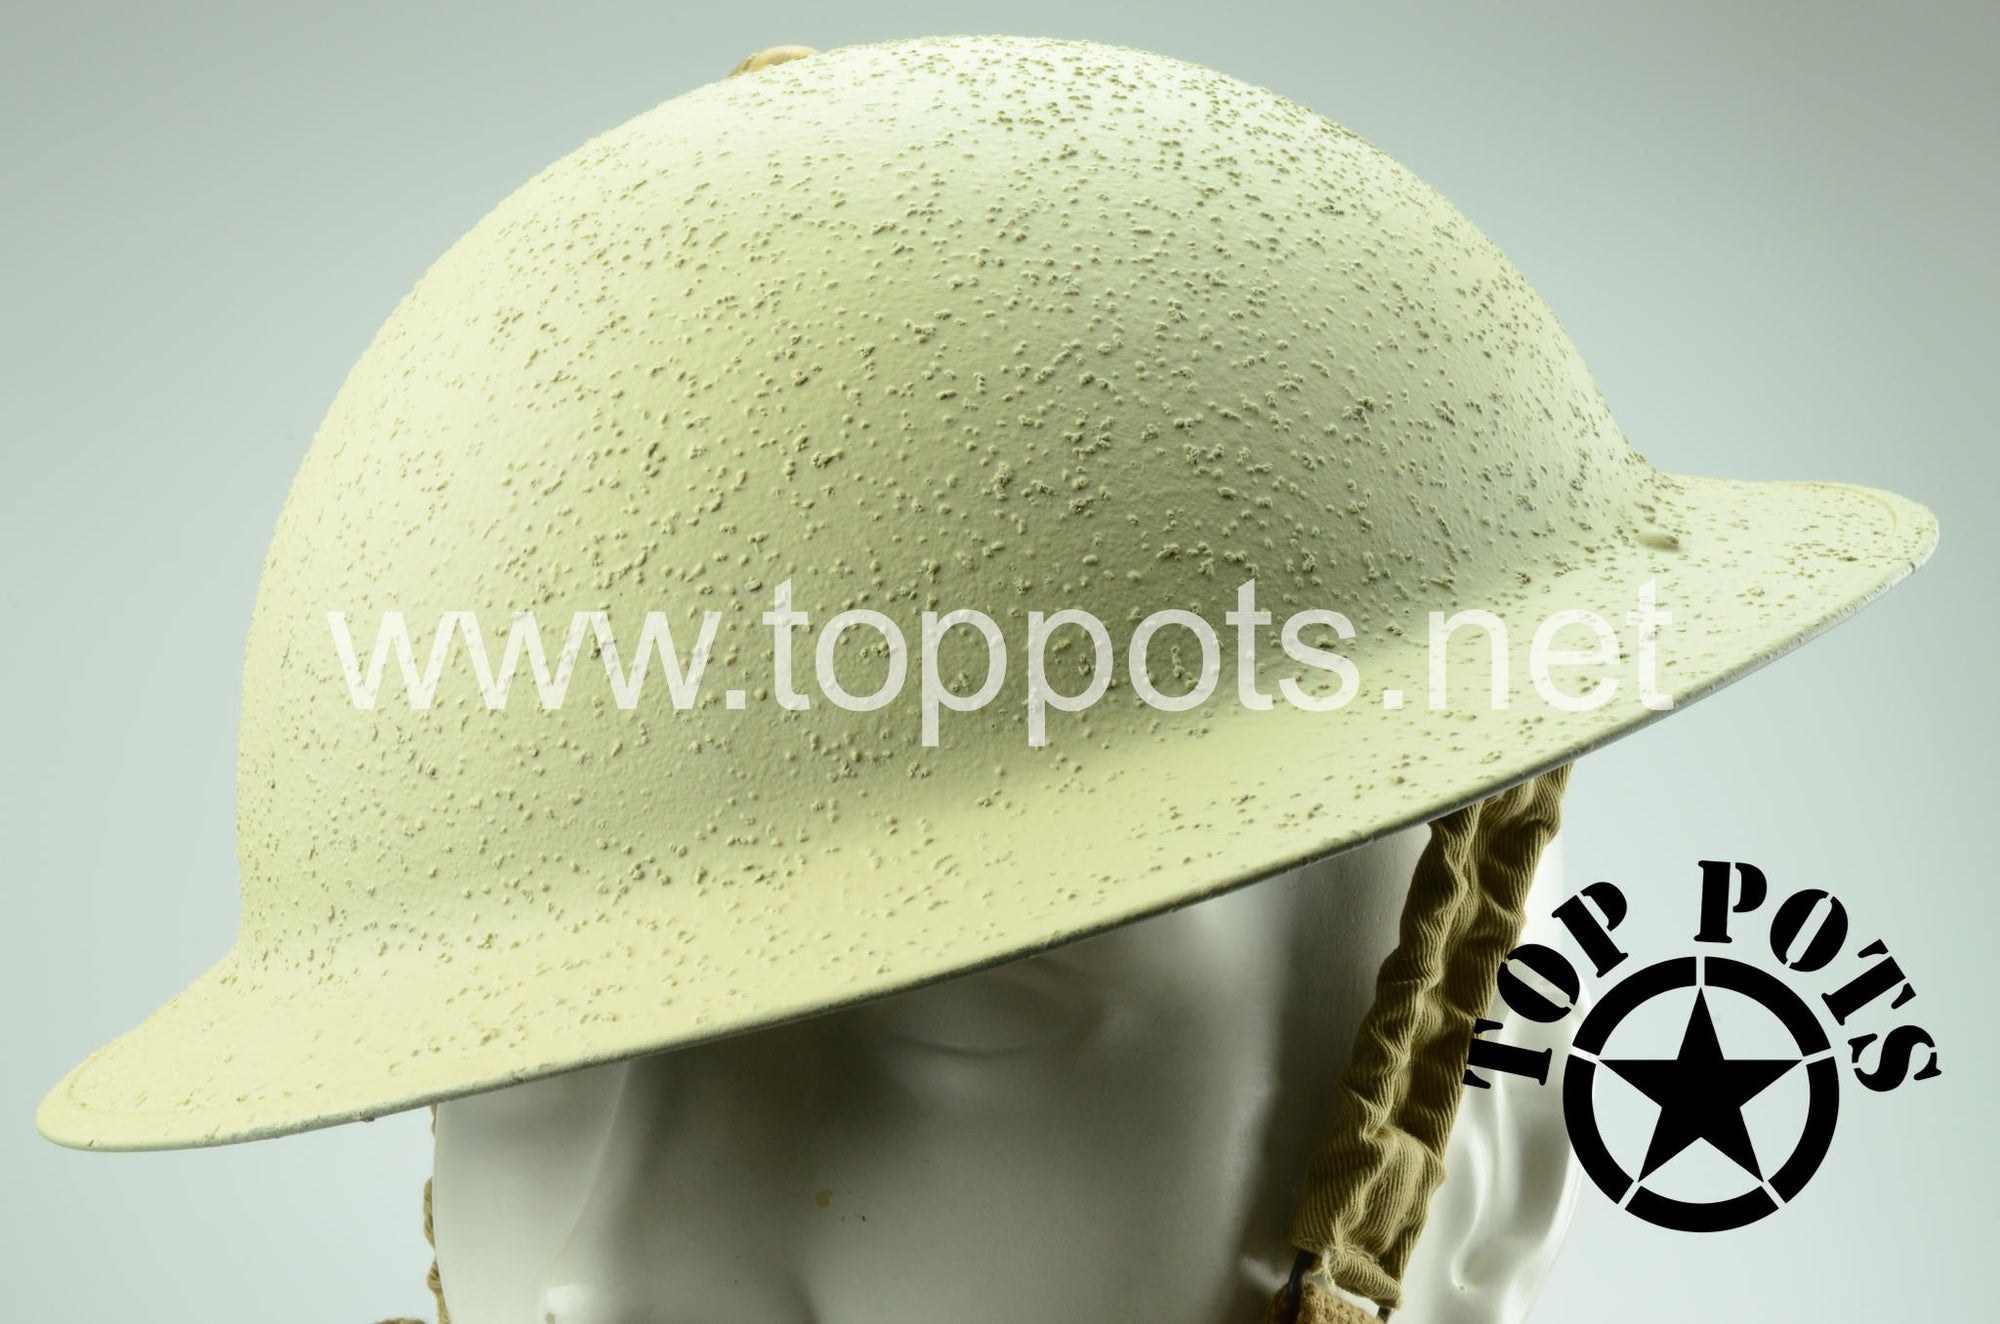 WWII British Army Reproduction MKII MK2 Enlisted Brodie Helmet with Desert Rat Paint Scheme – Field Textured Finish